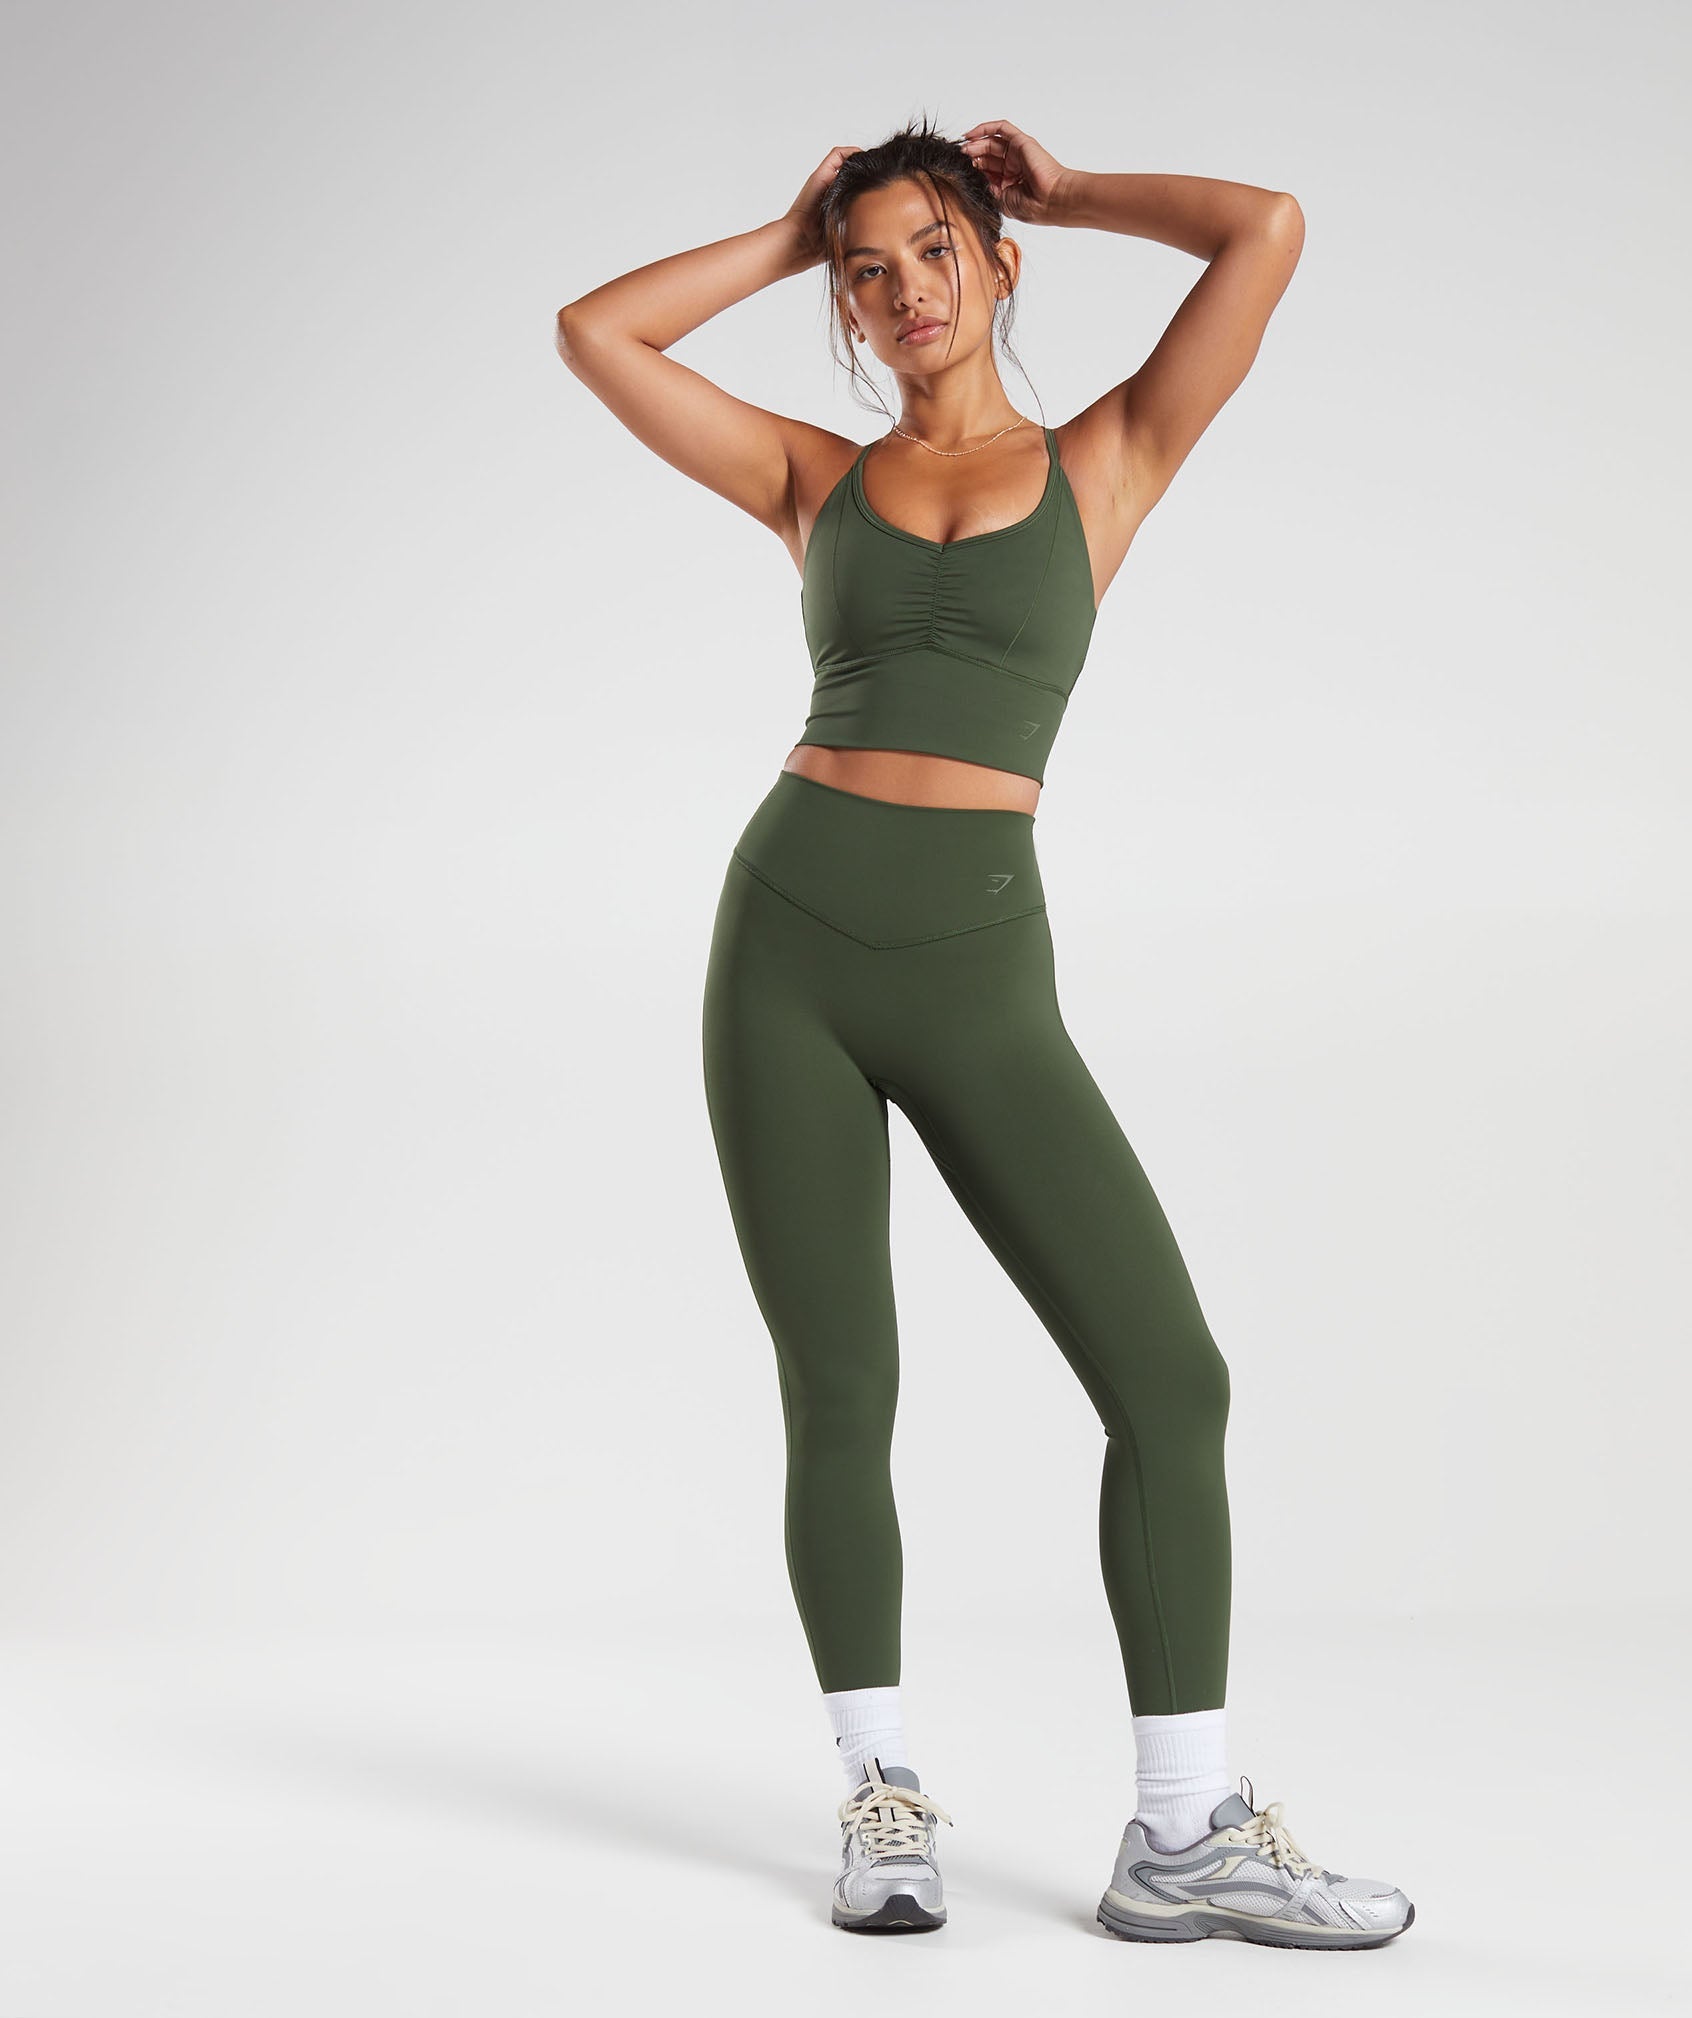 Elevate Leggings in Moss Olive - view 4